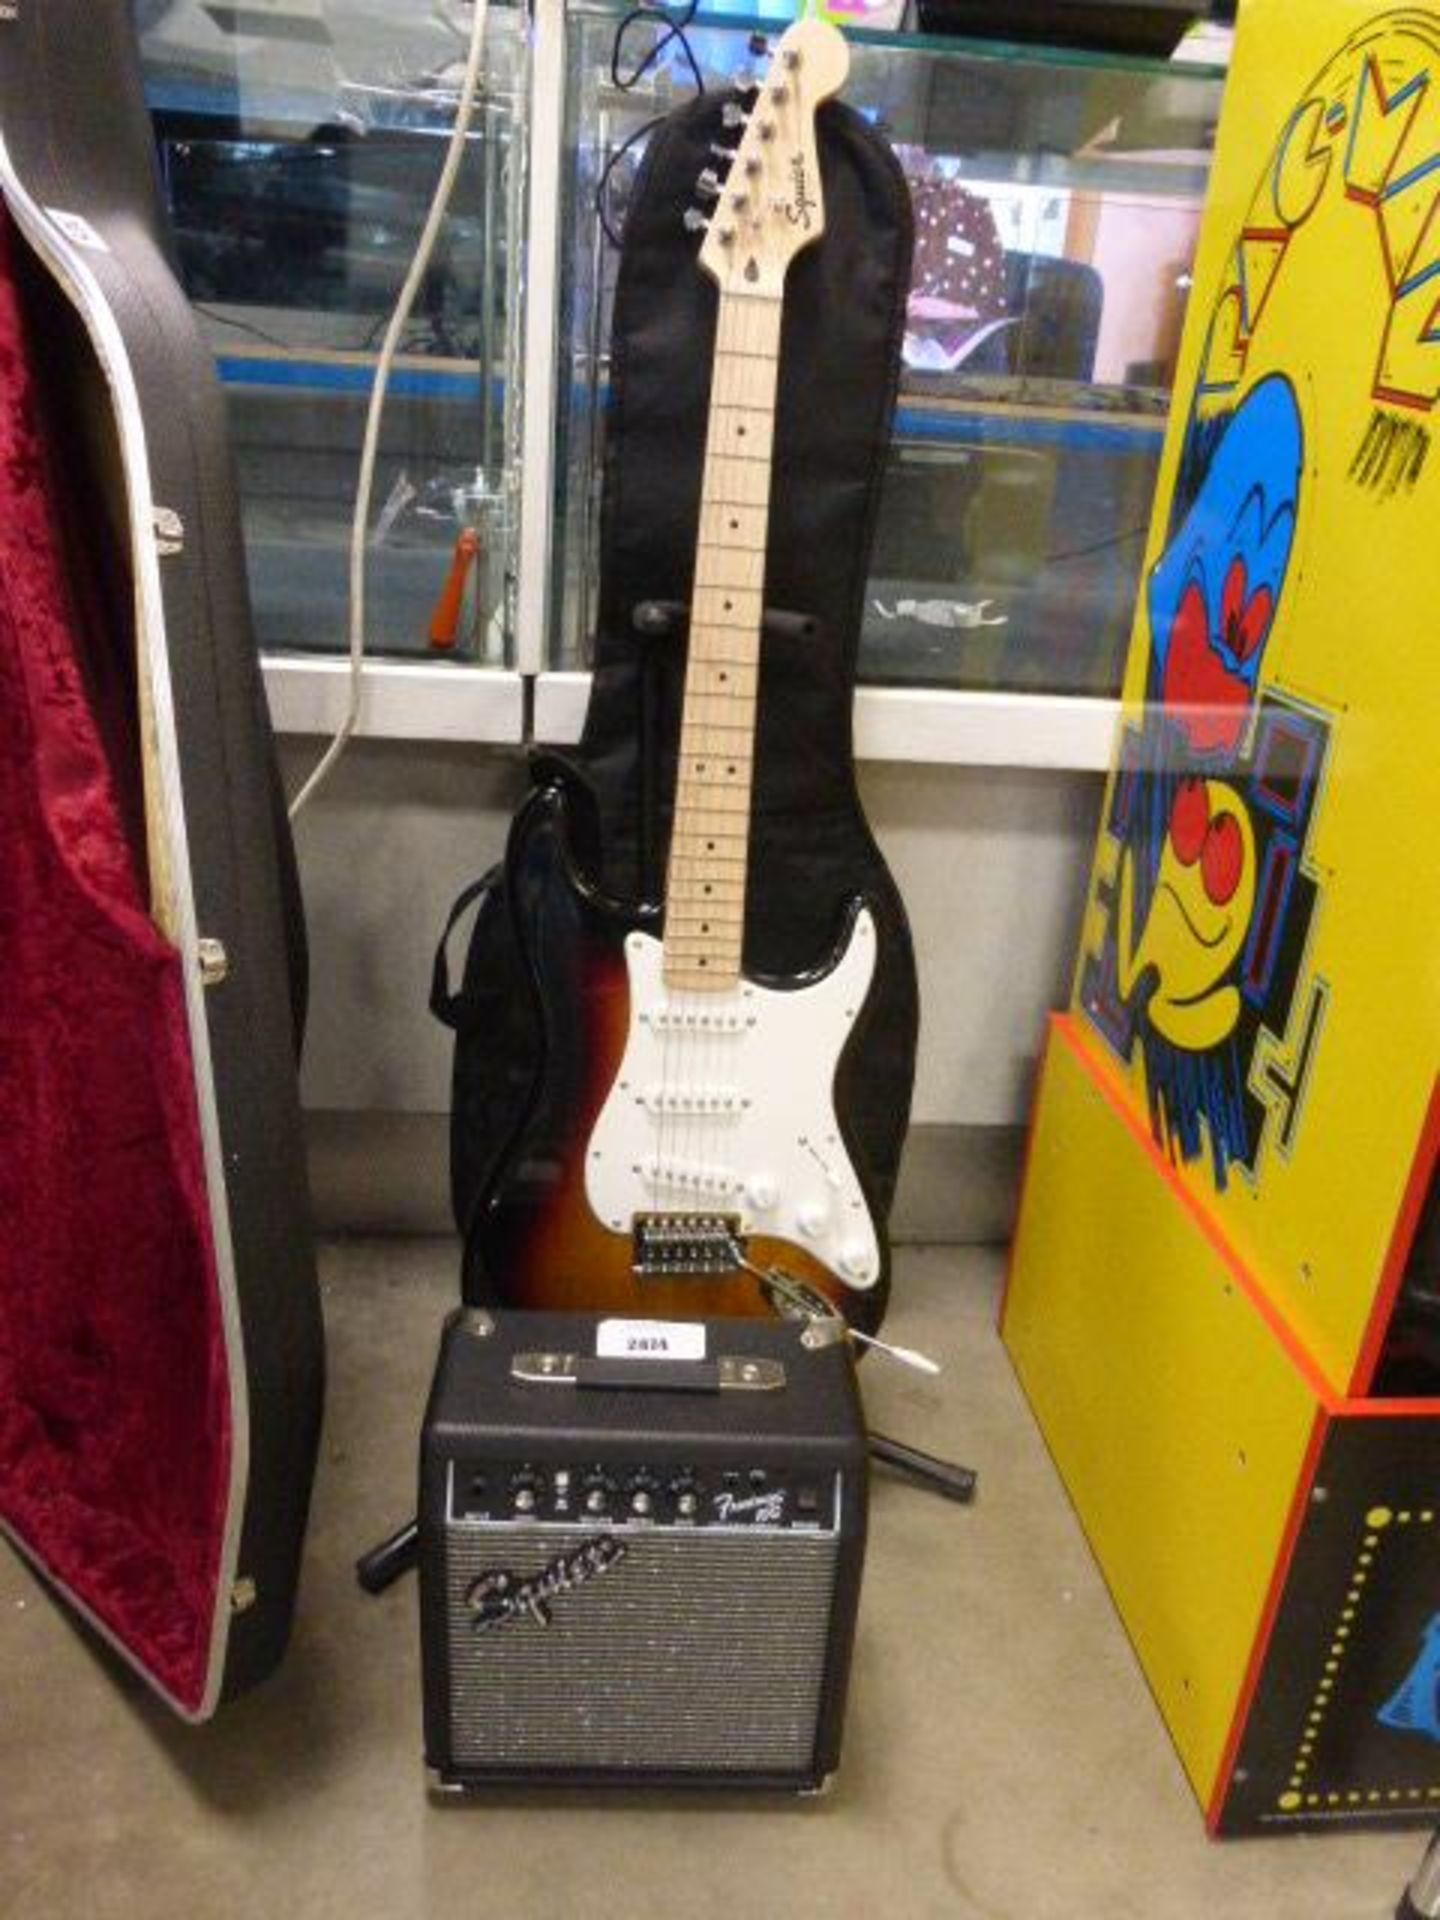 Squire Stratocaster by Fender 6 string electric guitar with carry case and Frontman 10g practice